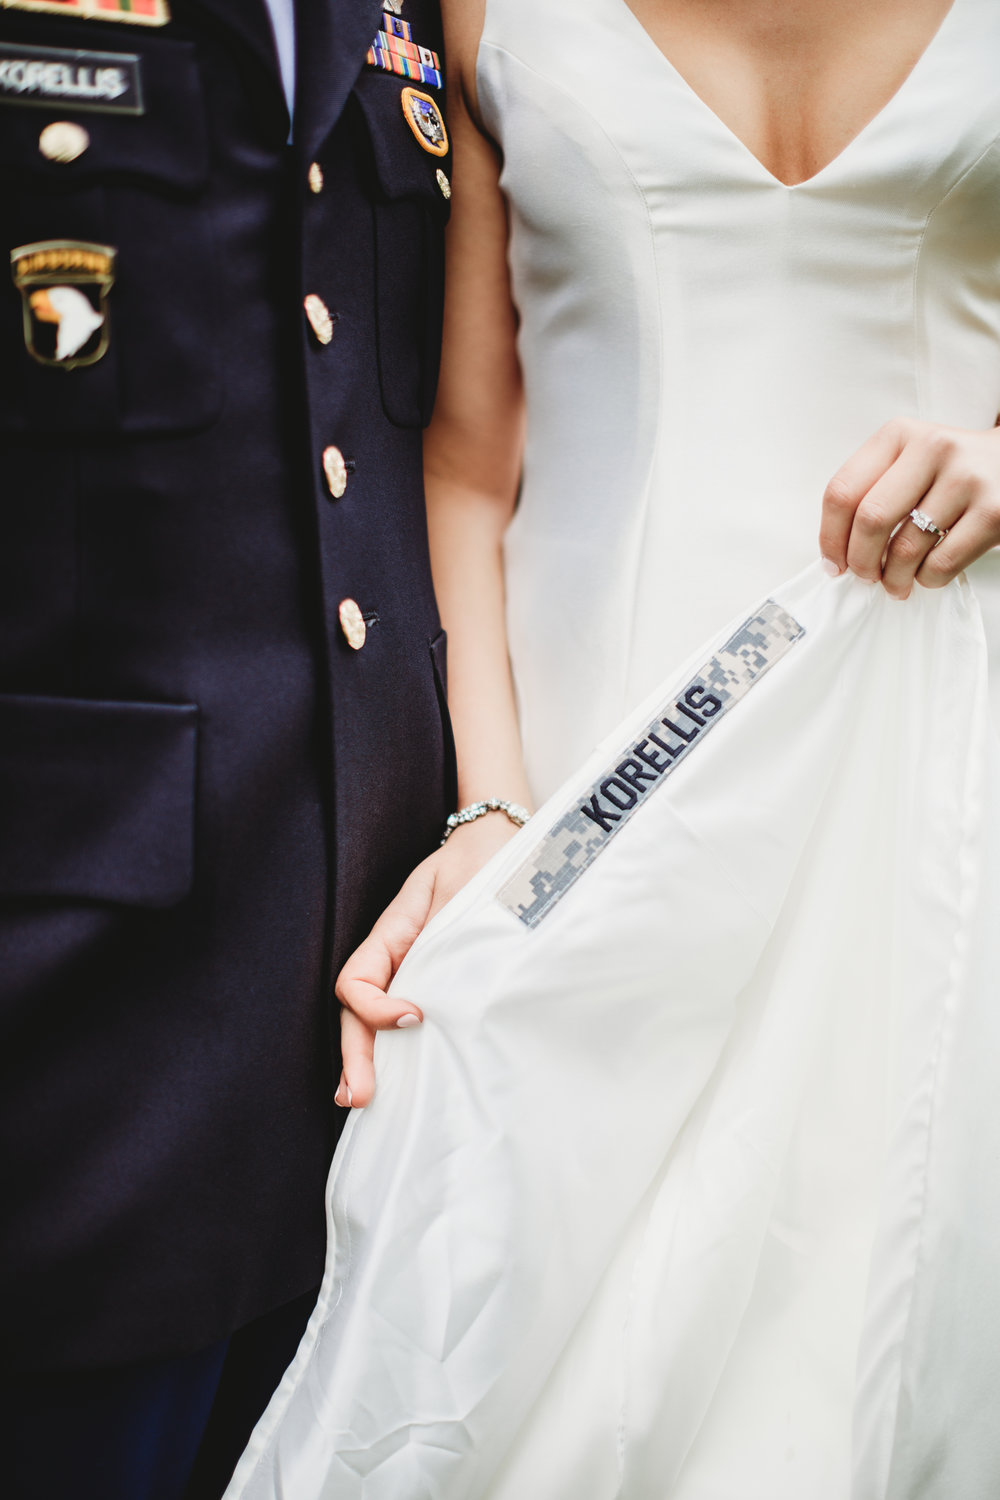 Military couple shows name under dress